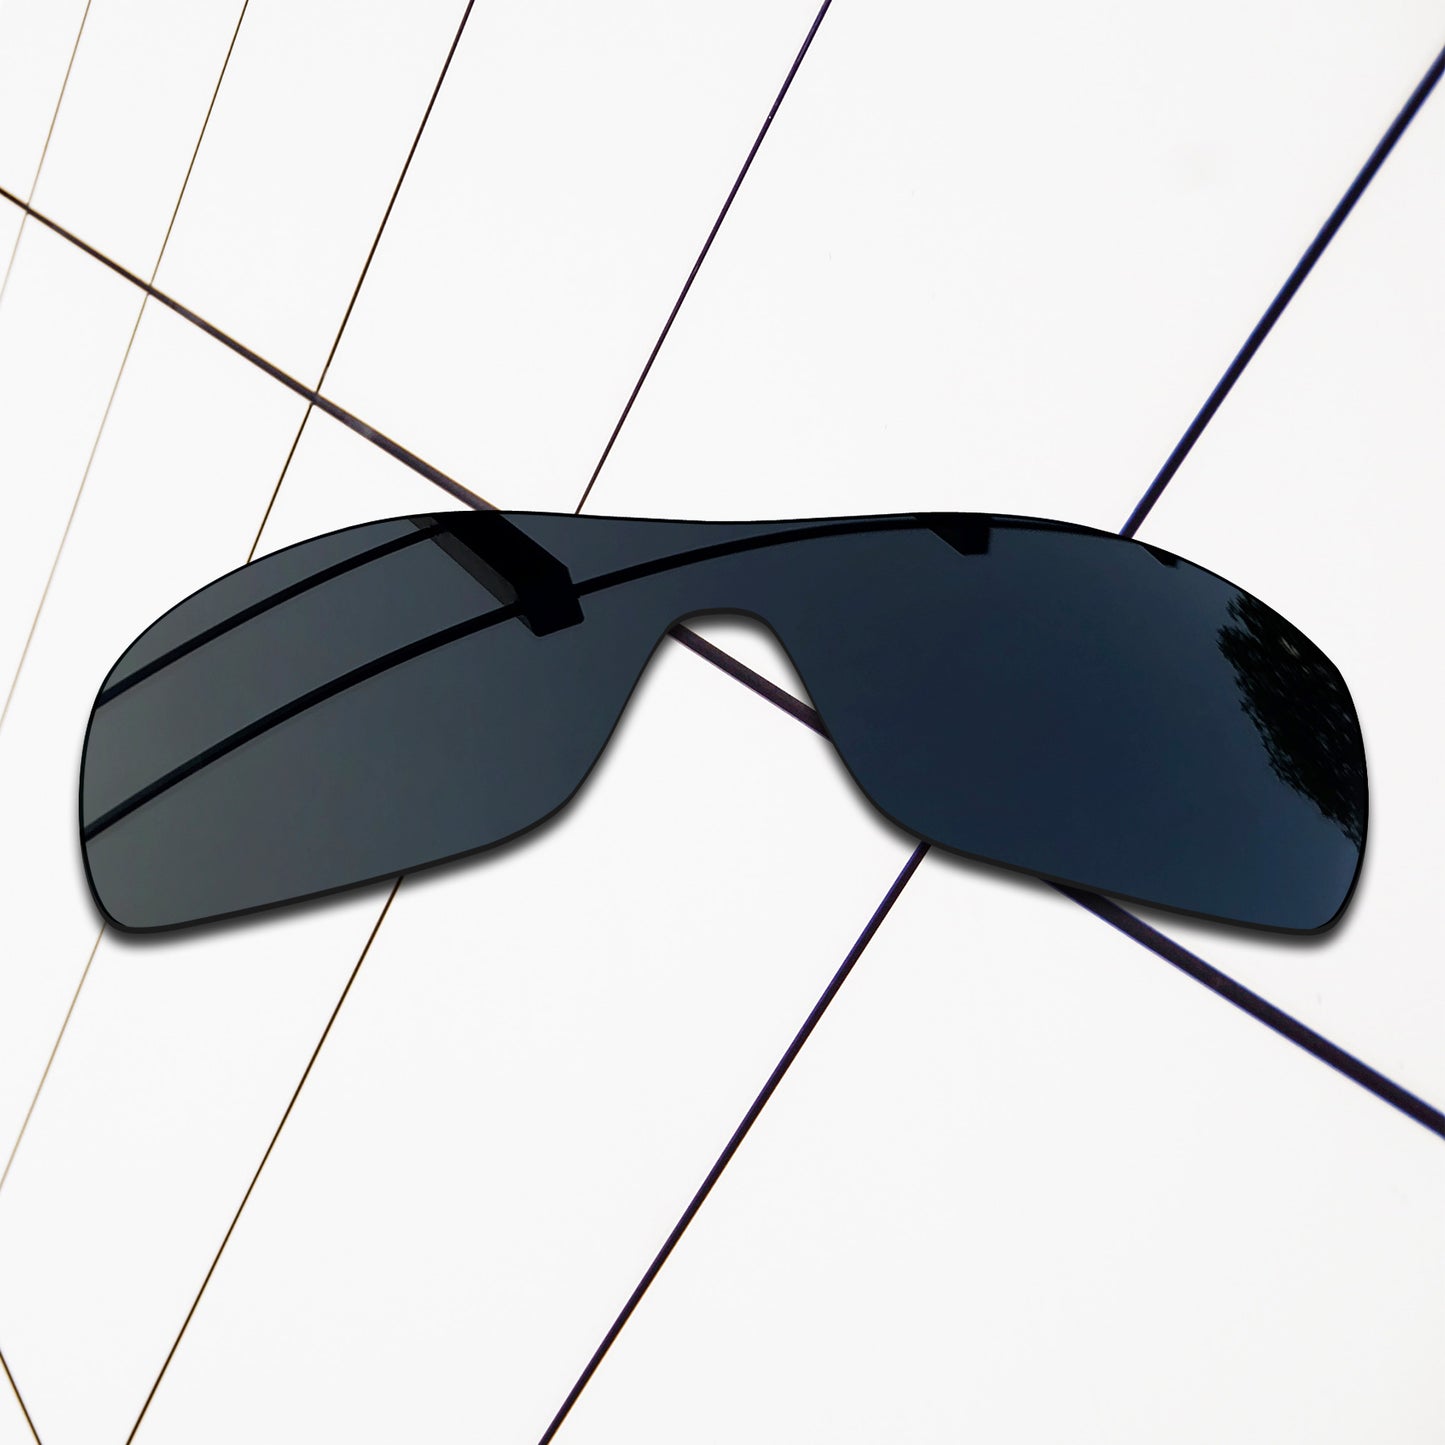 Polarized Replacement Lenses for Oakley Distress Sunglasses